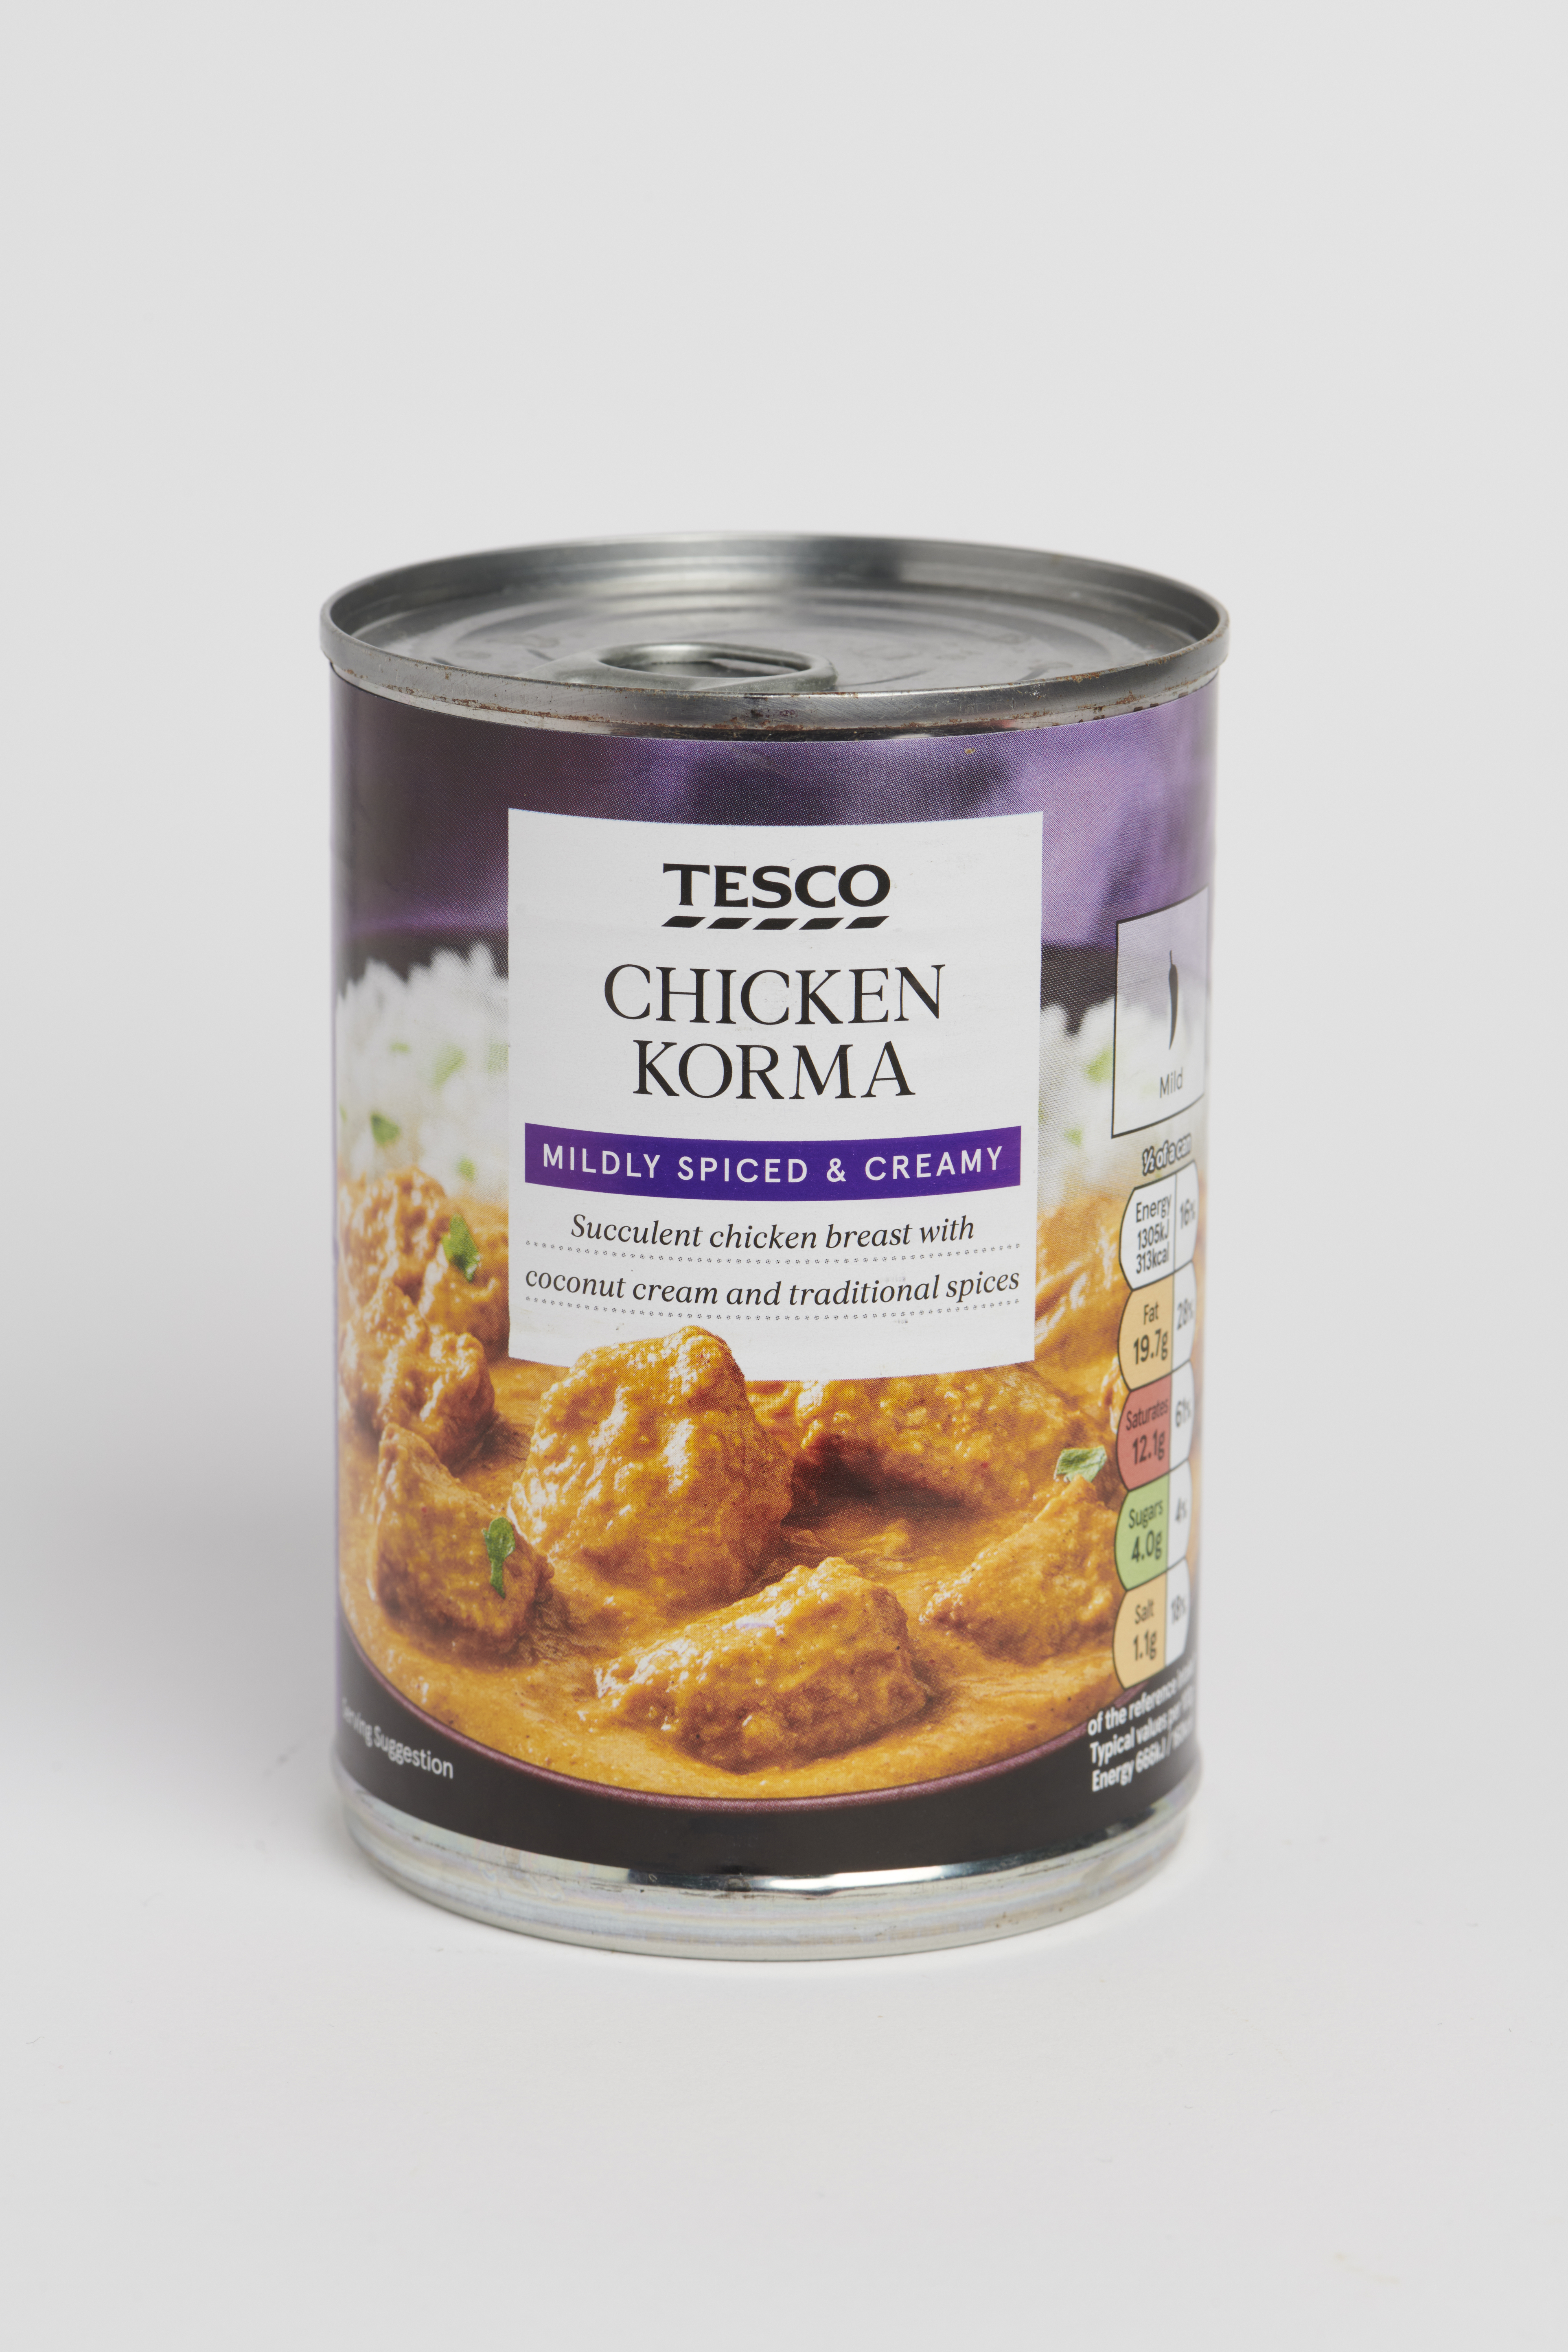 But this Tesco korma was just absolutely delicious